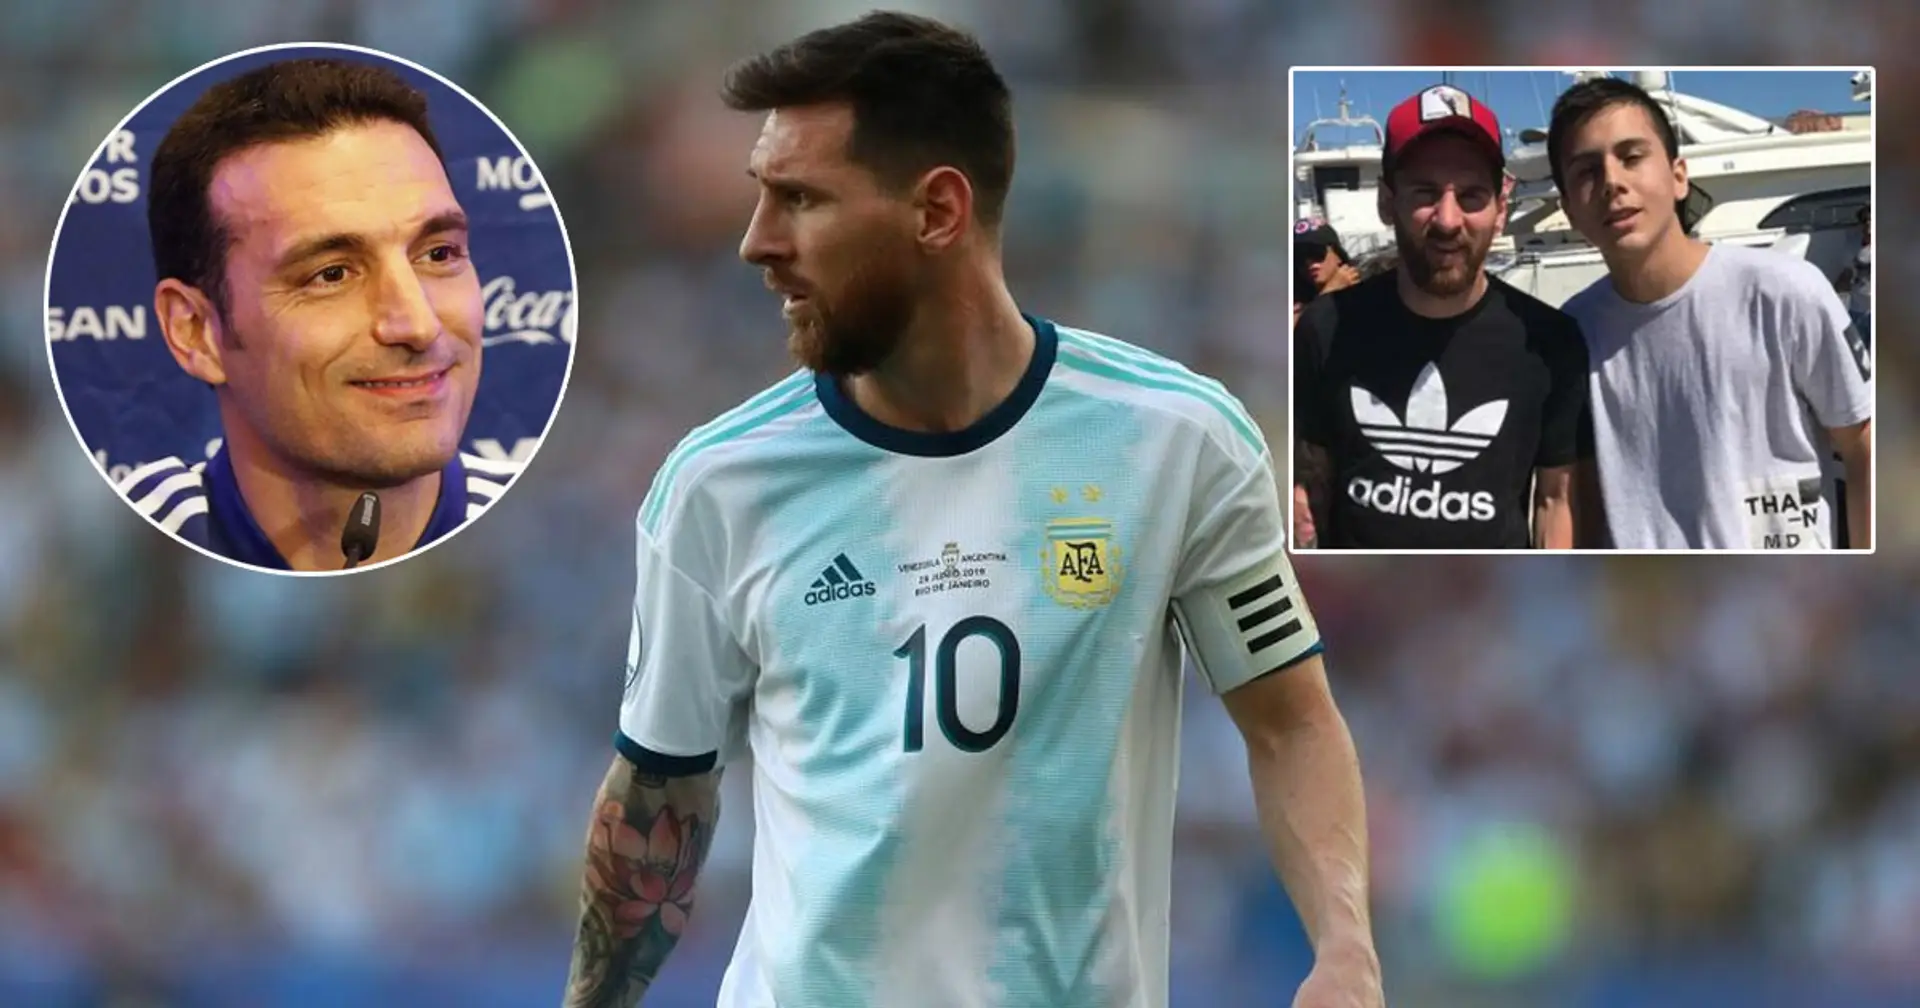 Argentina boss names thing he admires most about Messi — it's not his playing skills